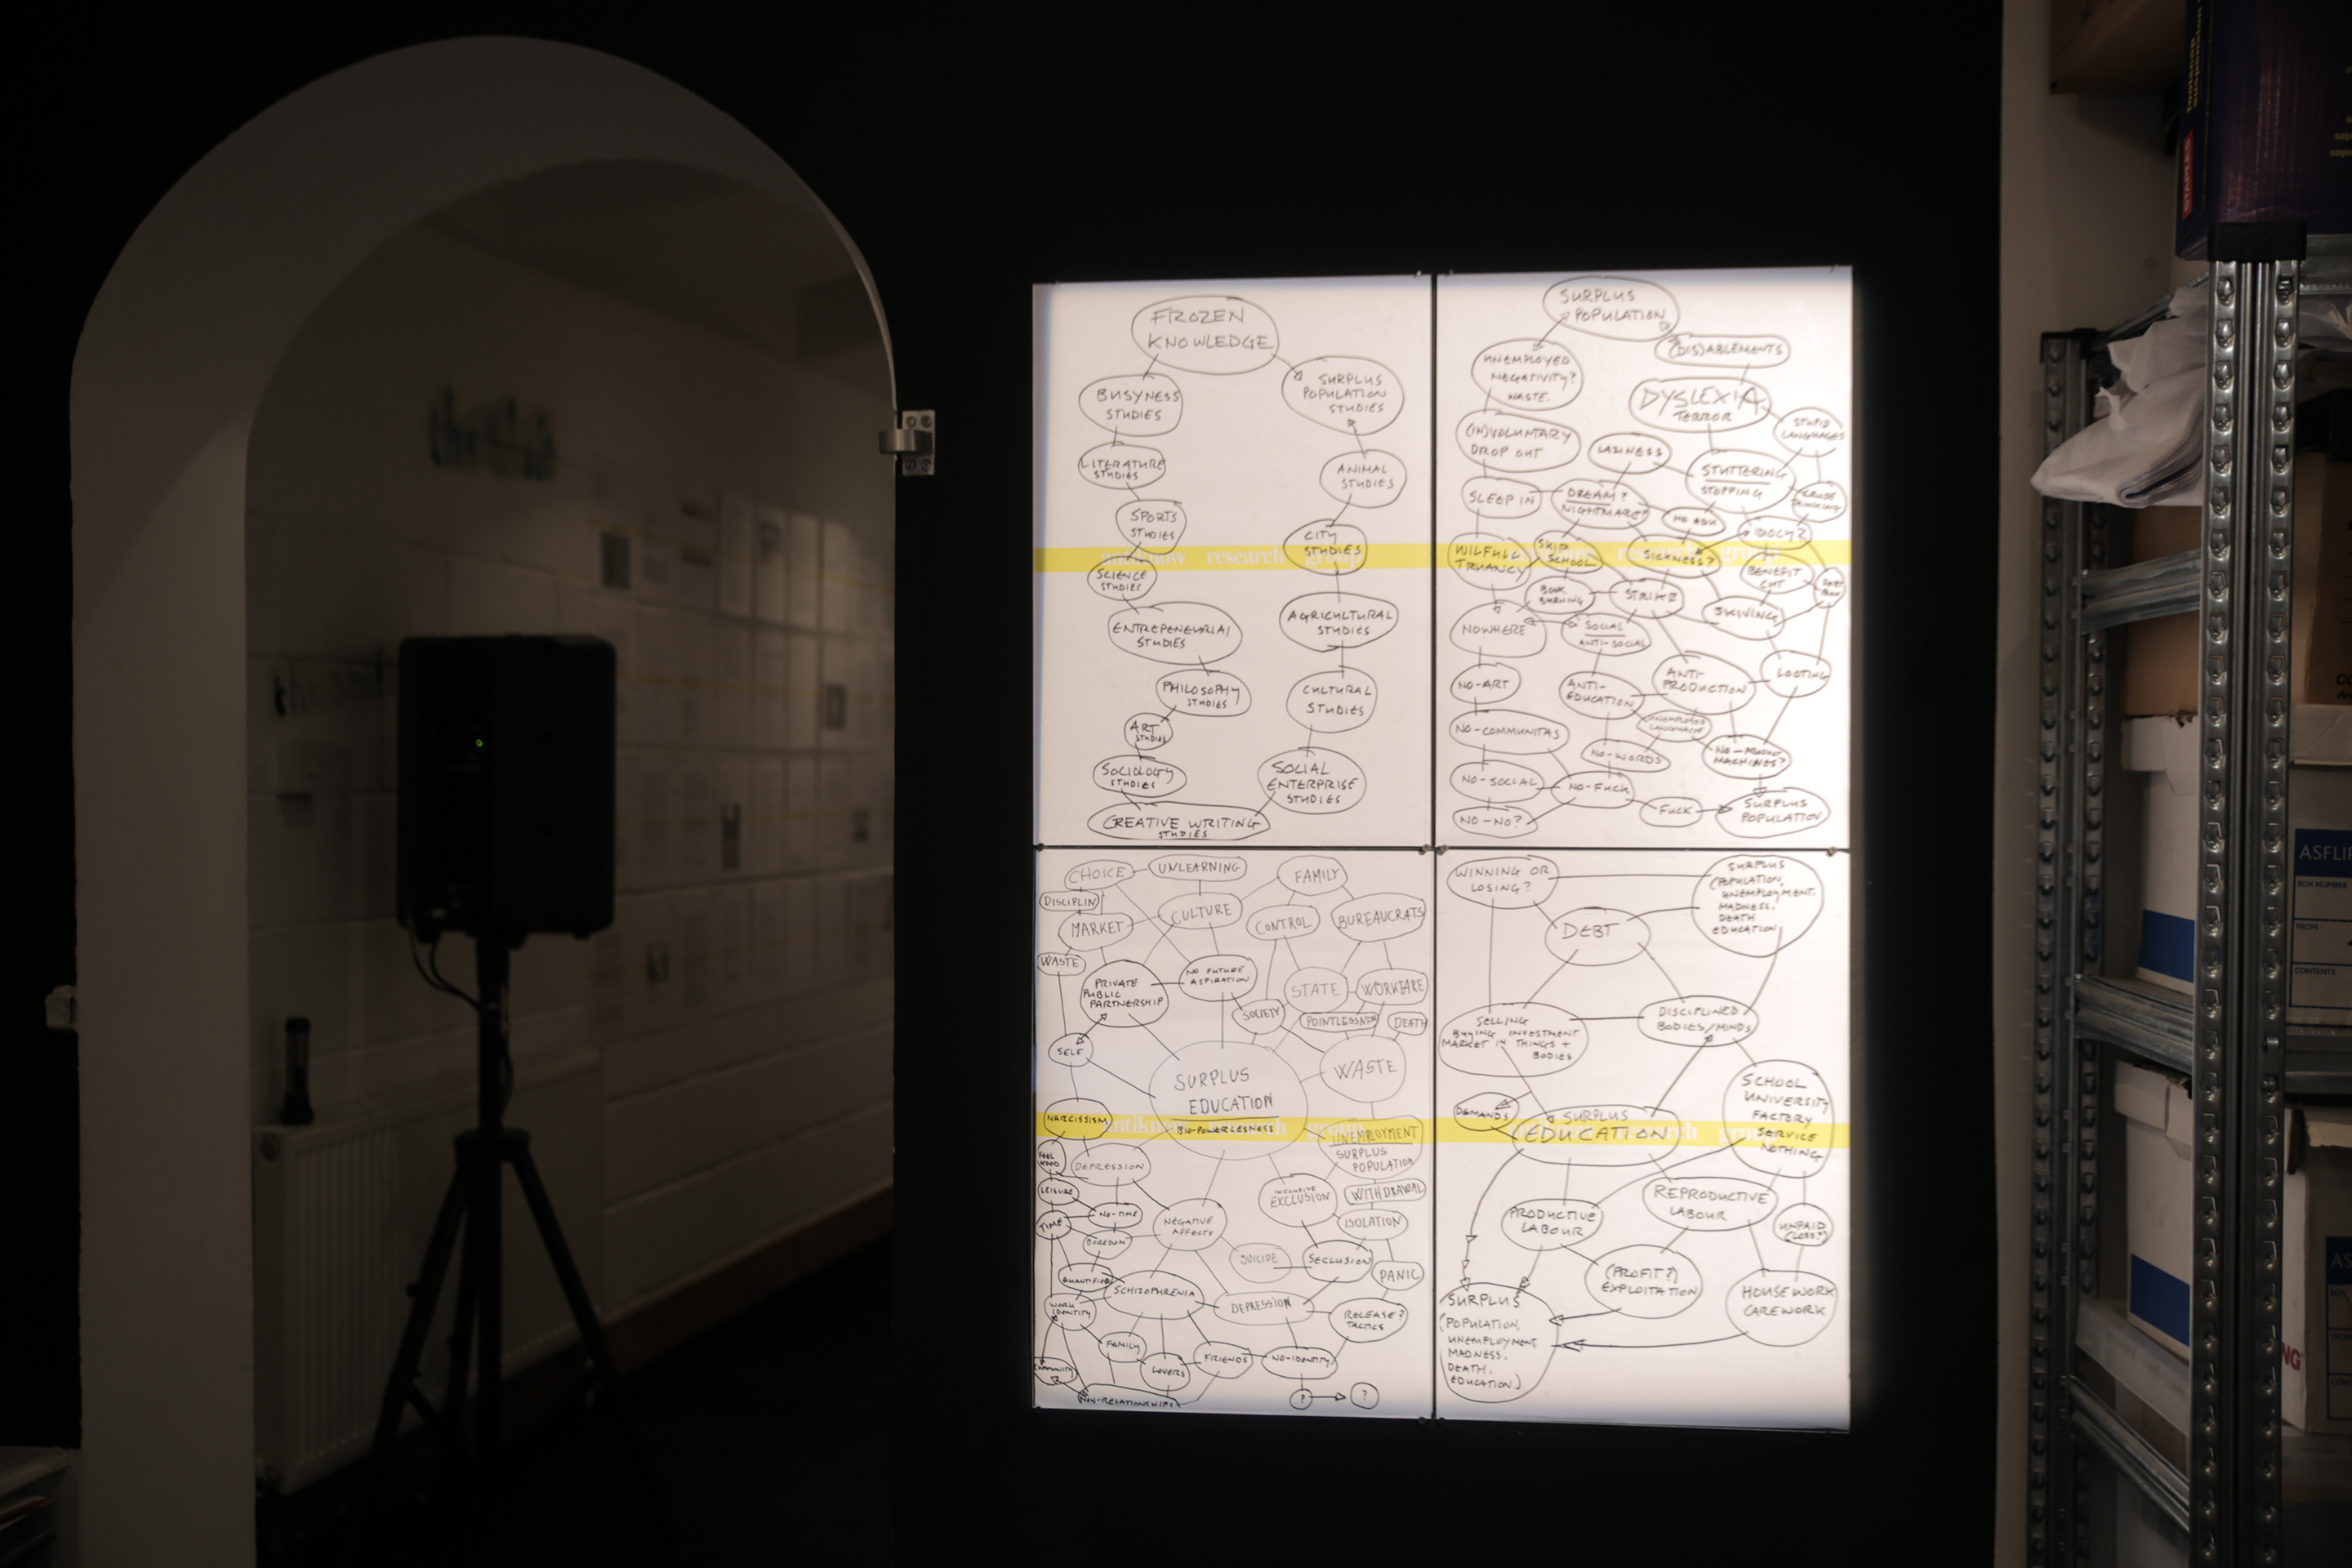 ANTIKNOW SCENE 1 The Brain. Diagrams of surplus education [A collection of diagrams on the wall] From ANTIKNOW Directed by Jakob Jakobsen 29 November 2013–12 January 2014 (FLAT TIME HOUSE SAVED BY LAST MINUTE INTERVENTION OF ITALIAN FOUNDATION 2)